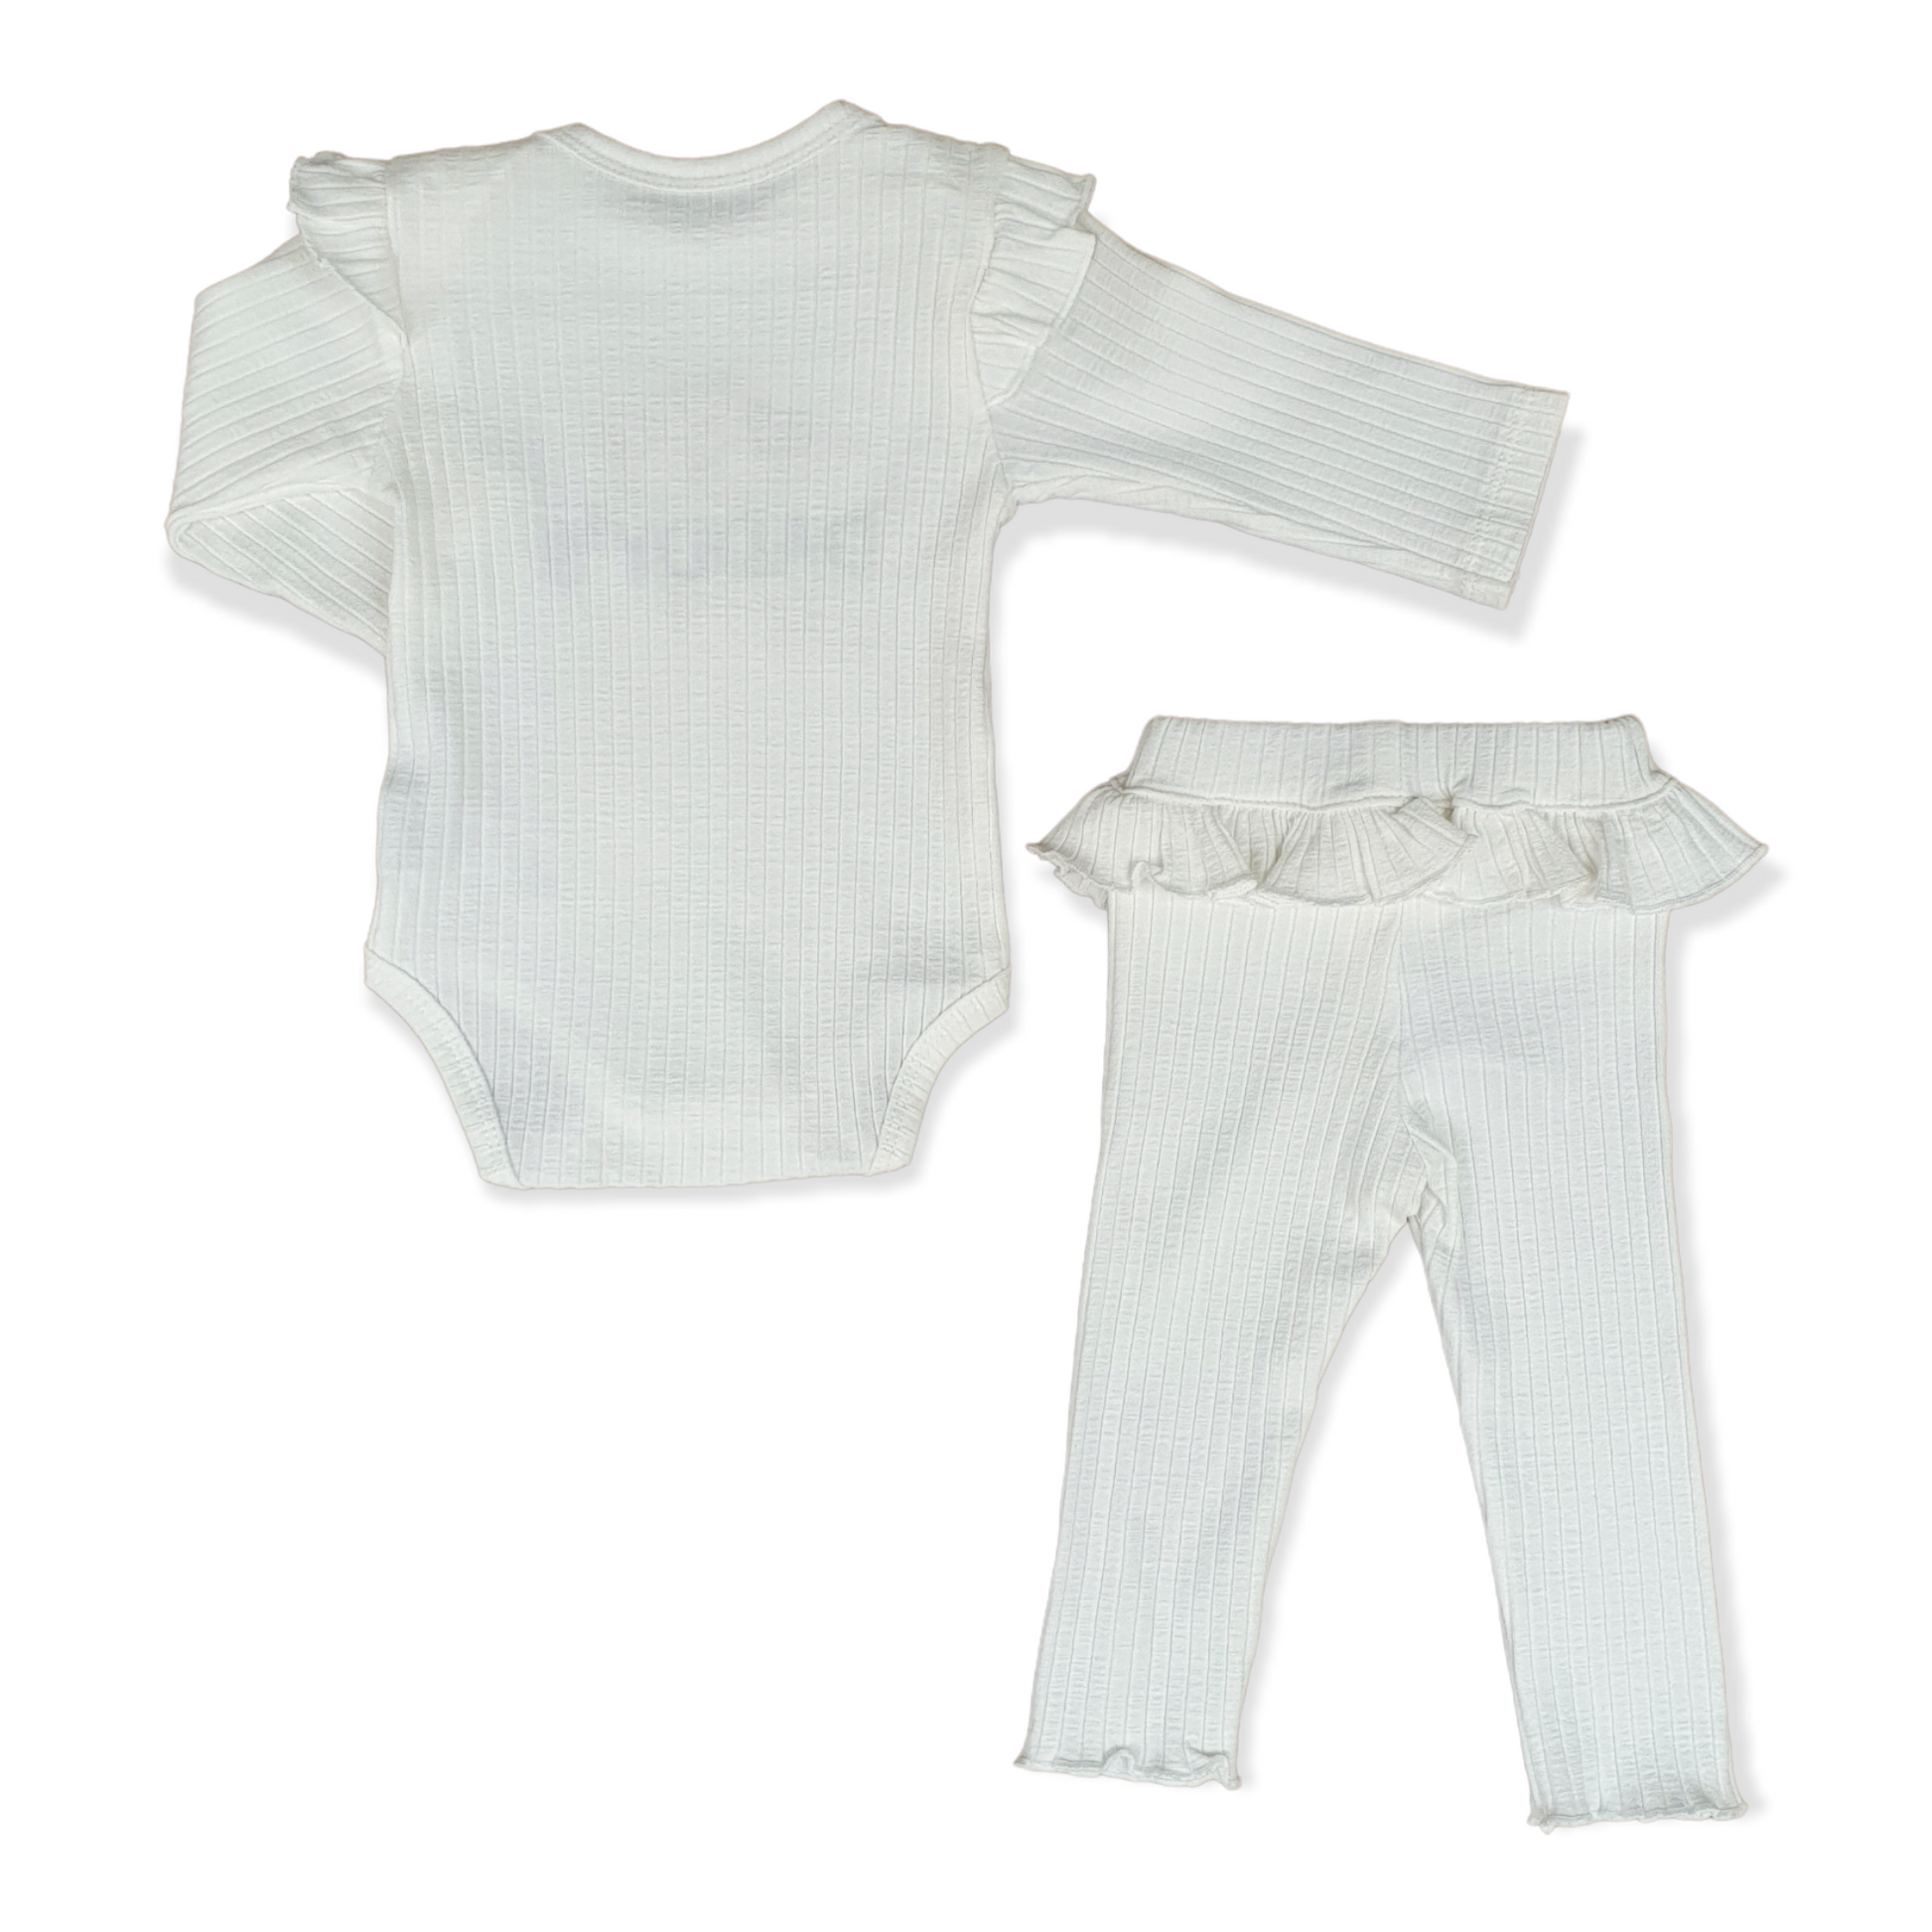 Off-White Daddy's Girl Body with Pants-Body, Bodysuit, catgirl, catset2pcs, Creeper, Crème, Daddy, Ecru, Footless, Girl, Long Sleeve, Off-white, Onesie, Pants, Princess, White-Puan Baby-[Too Twee]-[Tootwee]-[baby]-[newborn]-[clothes]-[essentials]-[toys]-[Lebanon]